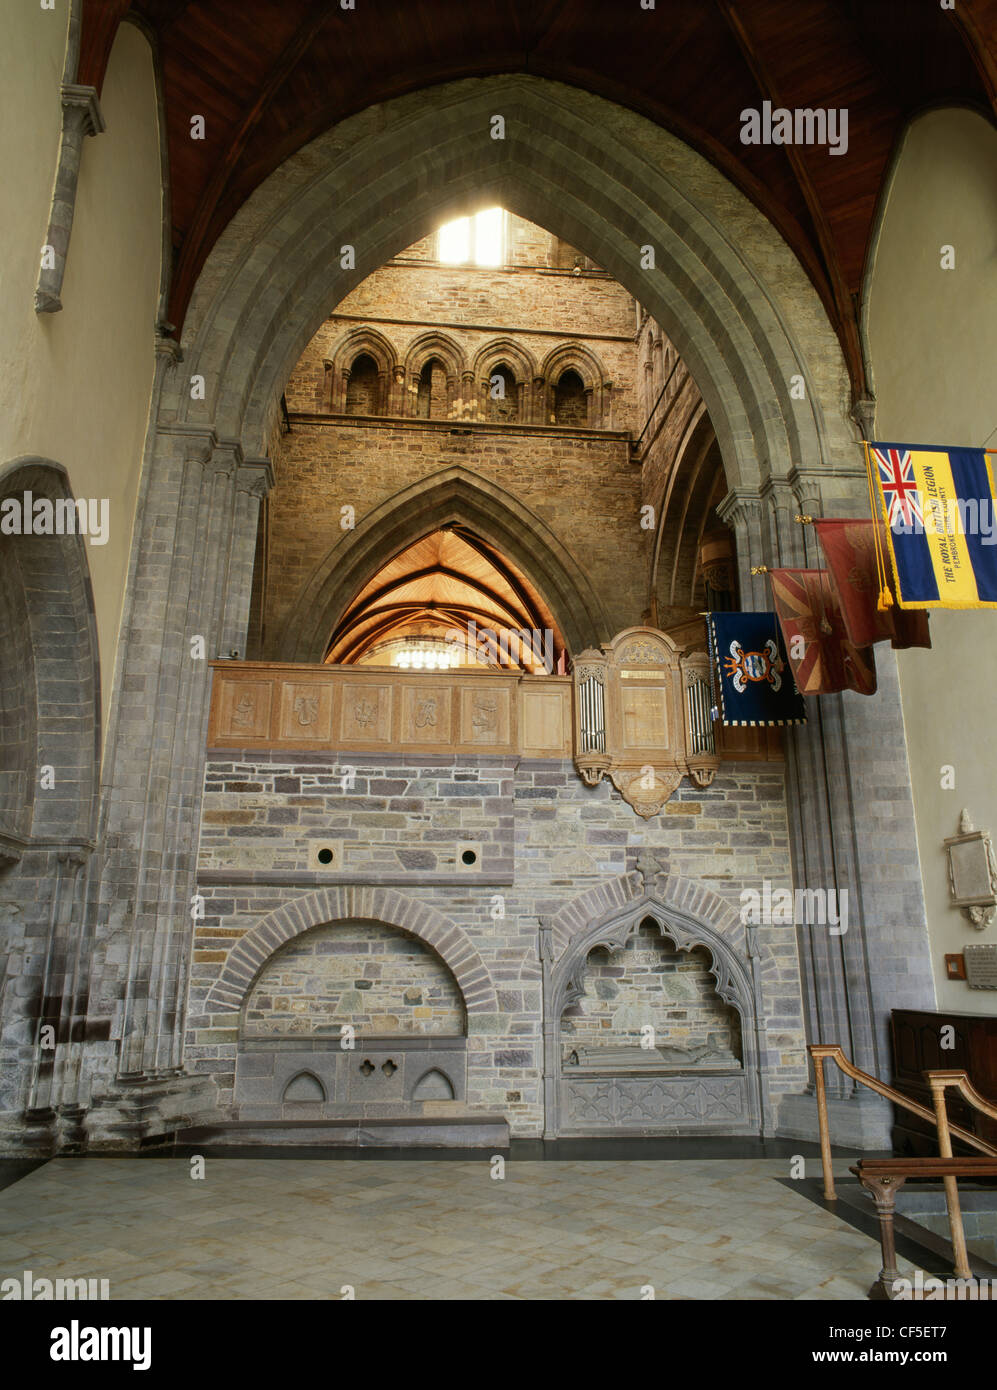 St Caradoc's shrine (left) in the south wall of the North Transept of St David's Cathedral. To the rear is the tower with choir Stock Photo